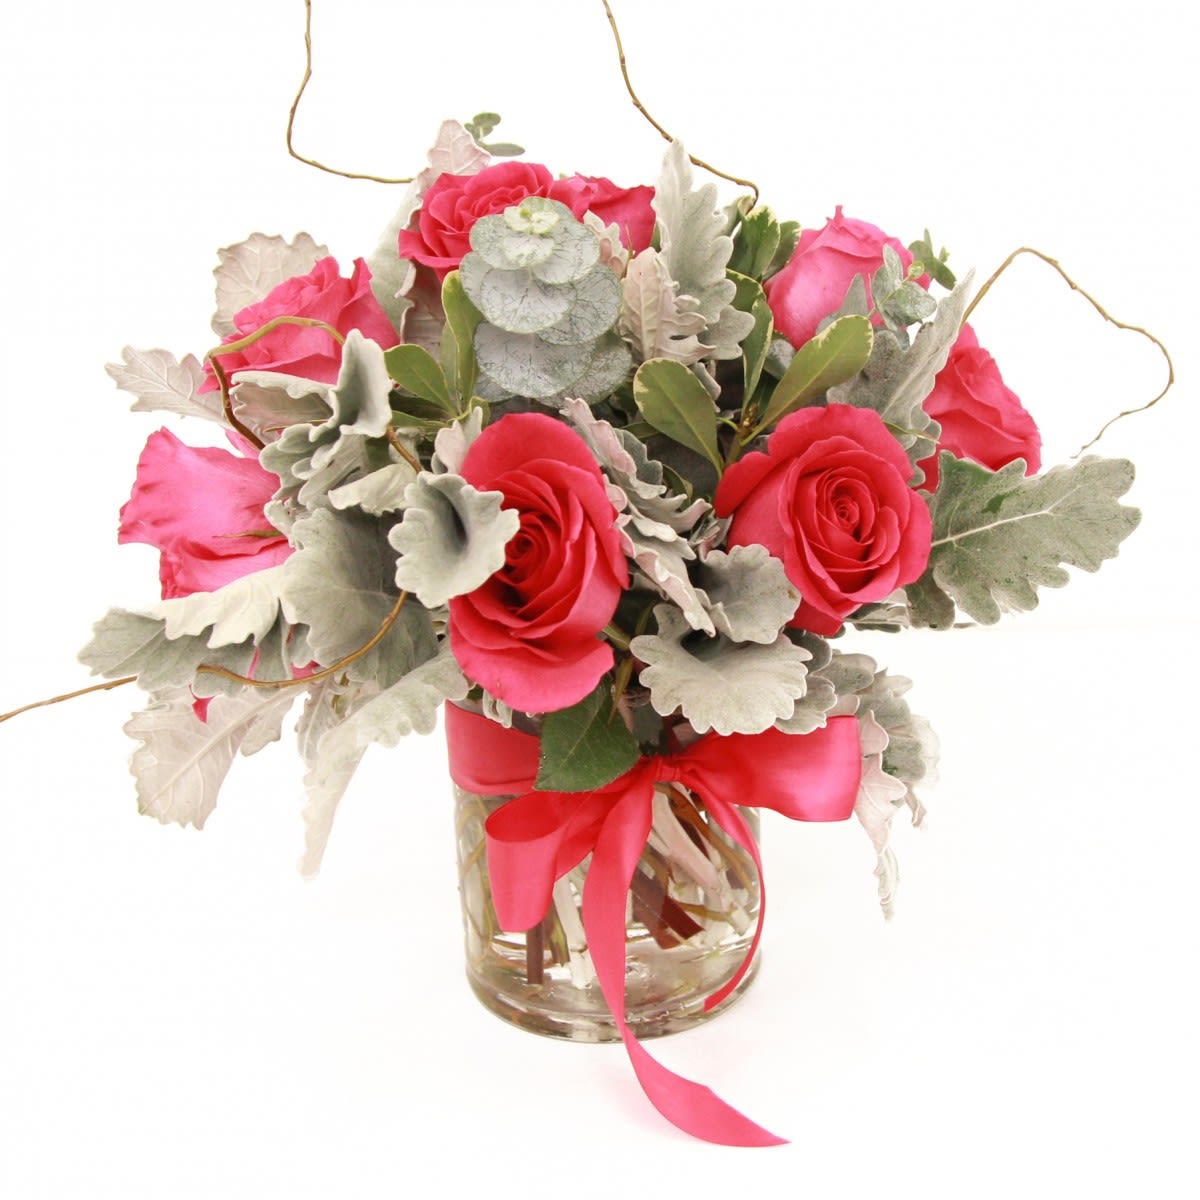 Medley Bouquet - the perfect way to say “I love you.” Whether you’re sending this beauty to a friend, mother, colleague or love, each bursting pink bloom is a fun way to make your affection stand out this Valentine’s Day.12 rose